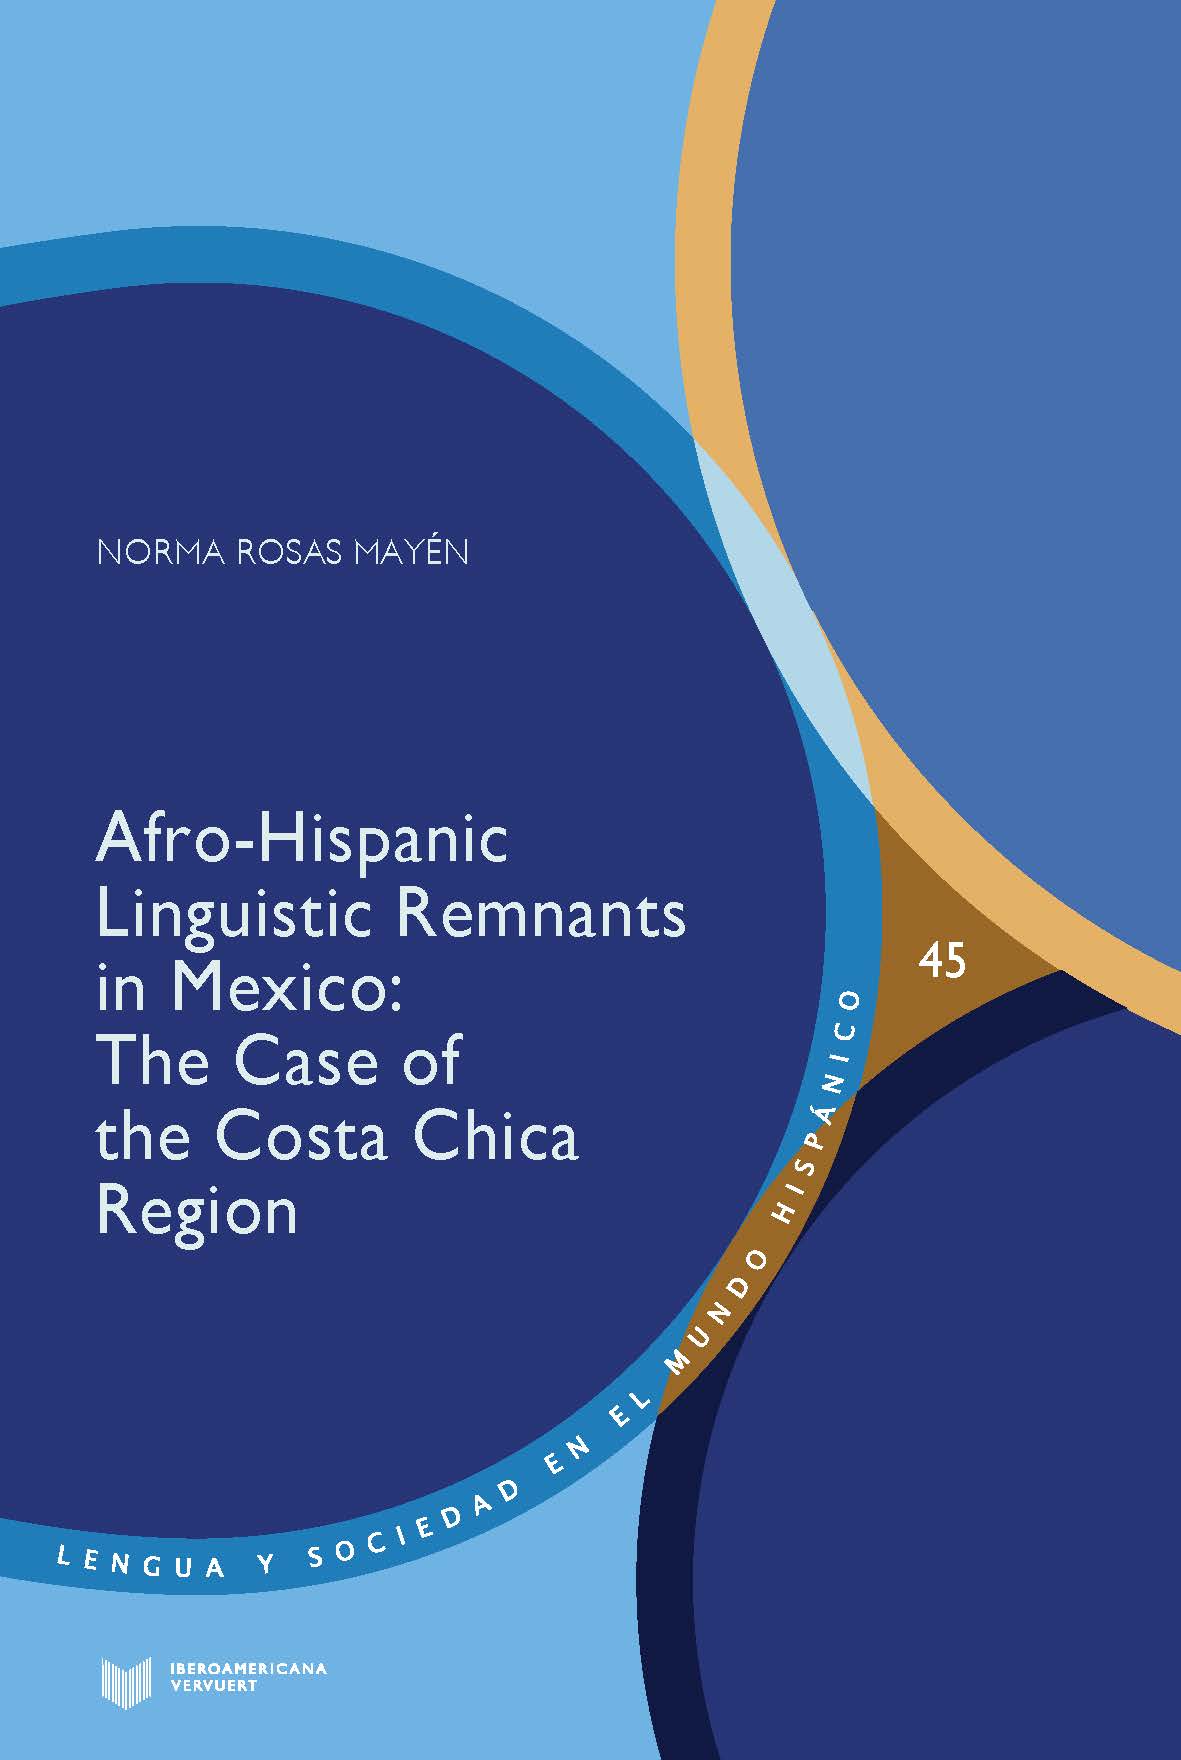 AFRO HISPANIC LINGUISTIC REMNANTS IN MEXICO